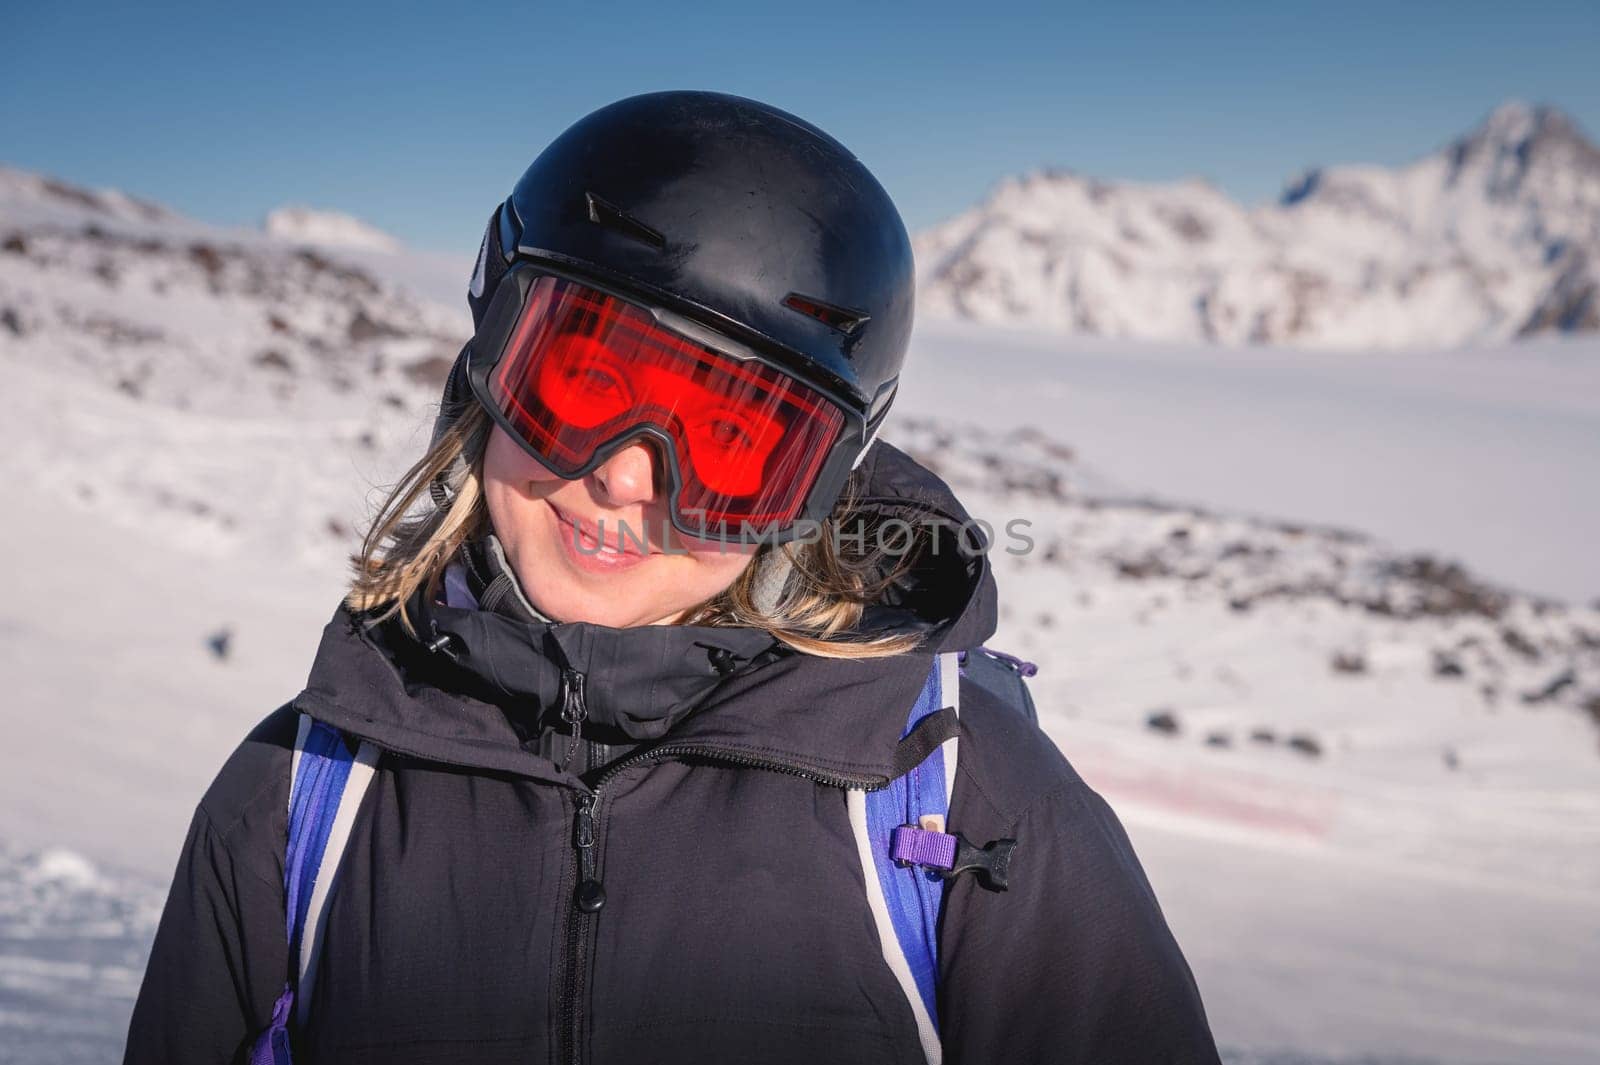 Woman skier on the slope of a mountain resort. Portrait of a young woman smiling in ski equipment, goggles and a helmet by yanik88